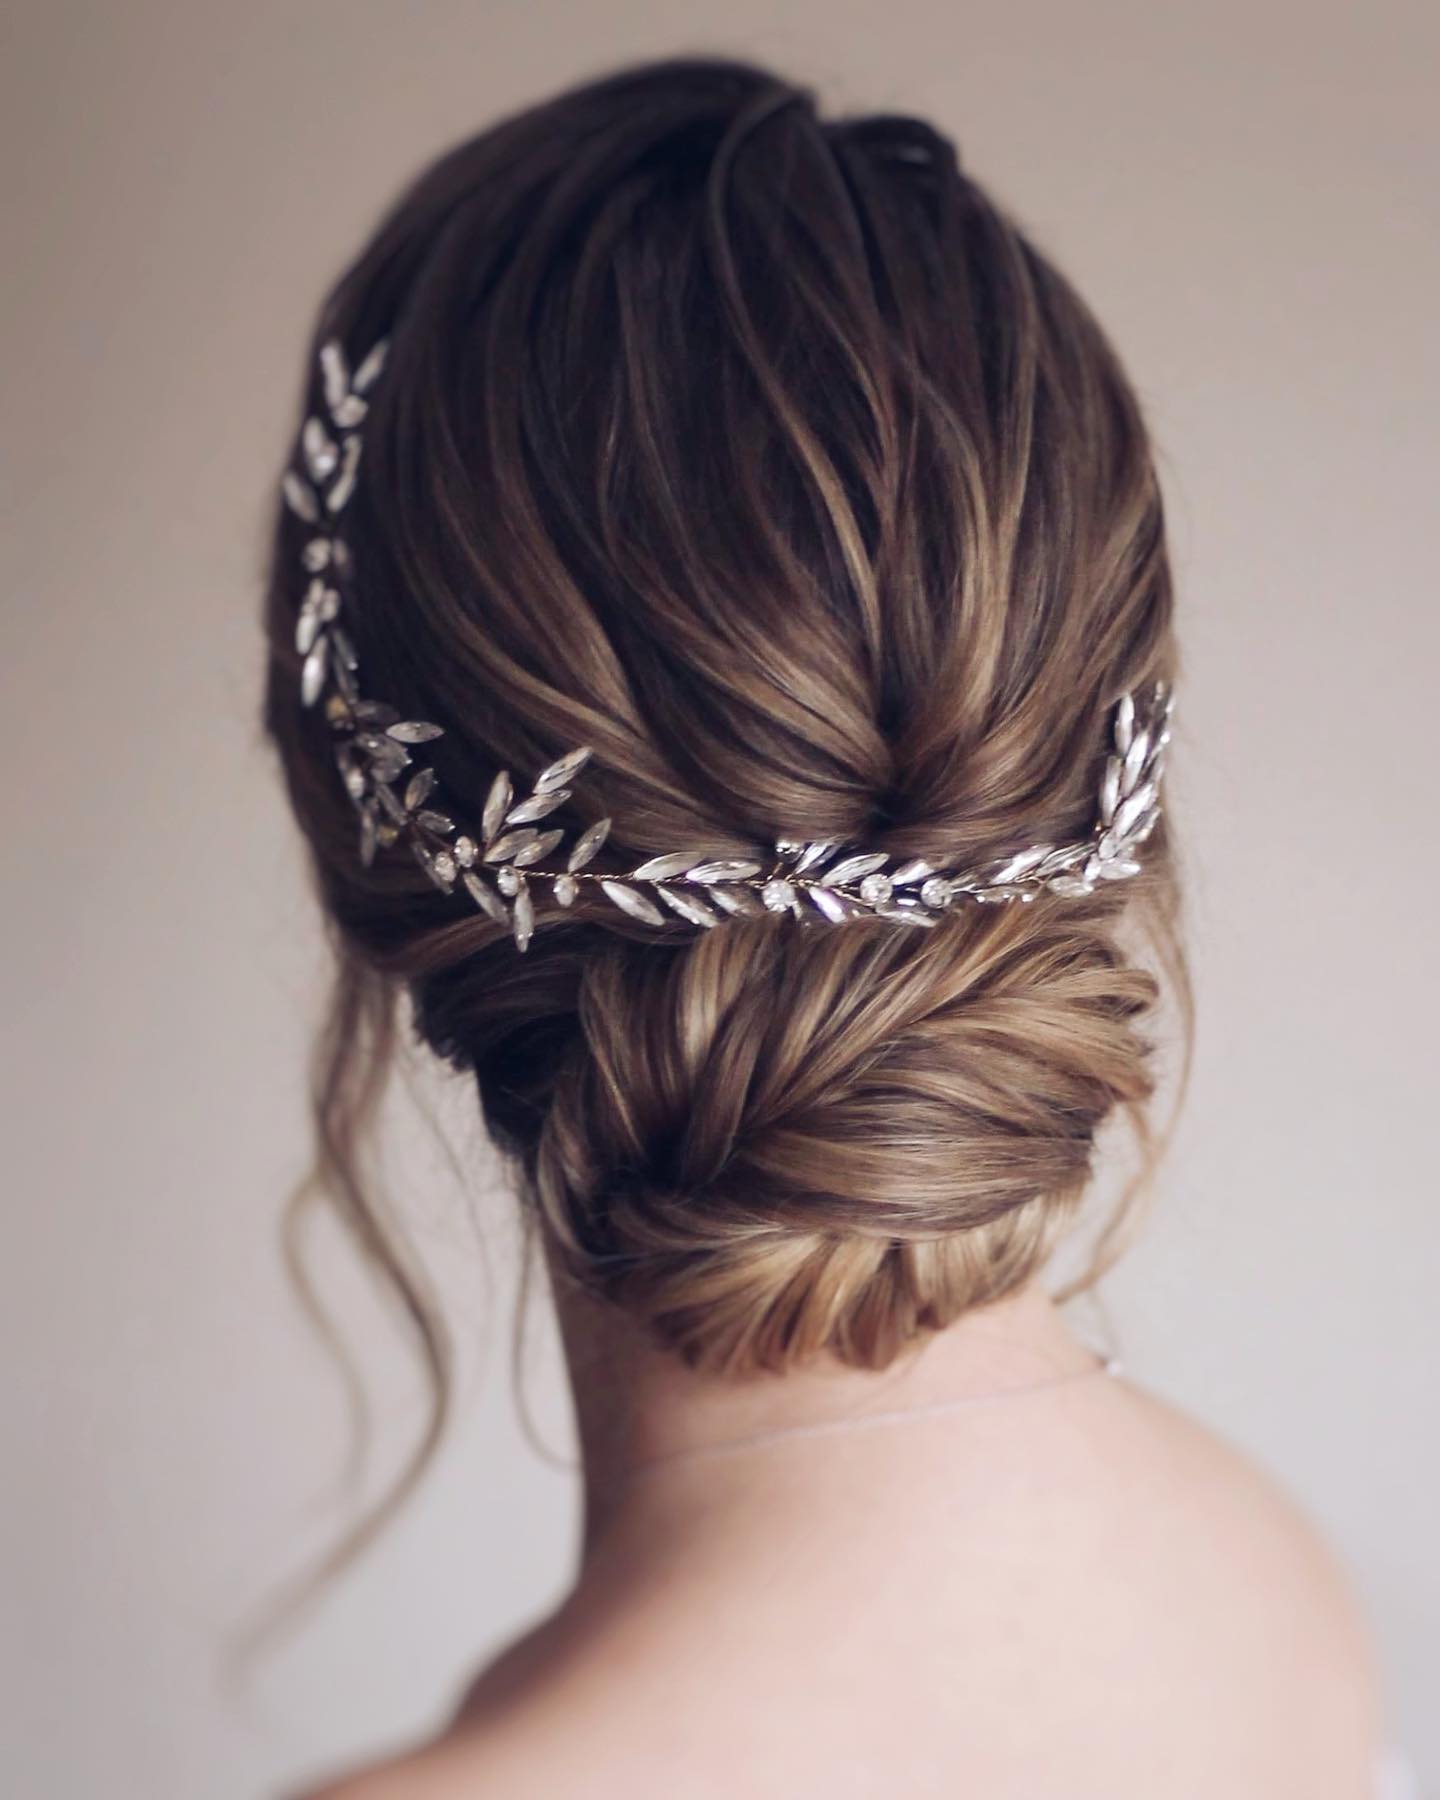 5 Types of Wedding Hair Accessories for a Showstopper Look